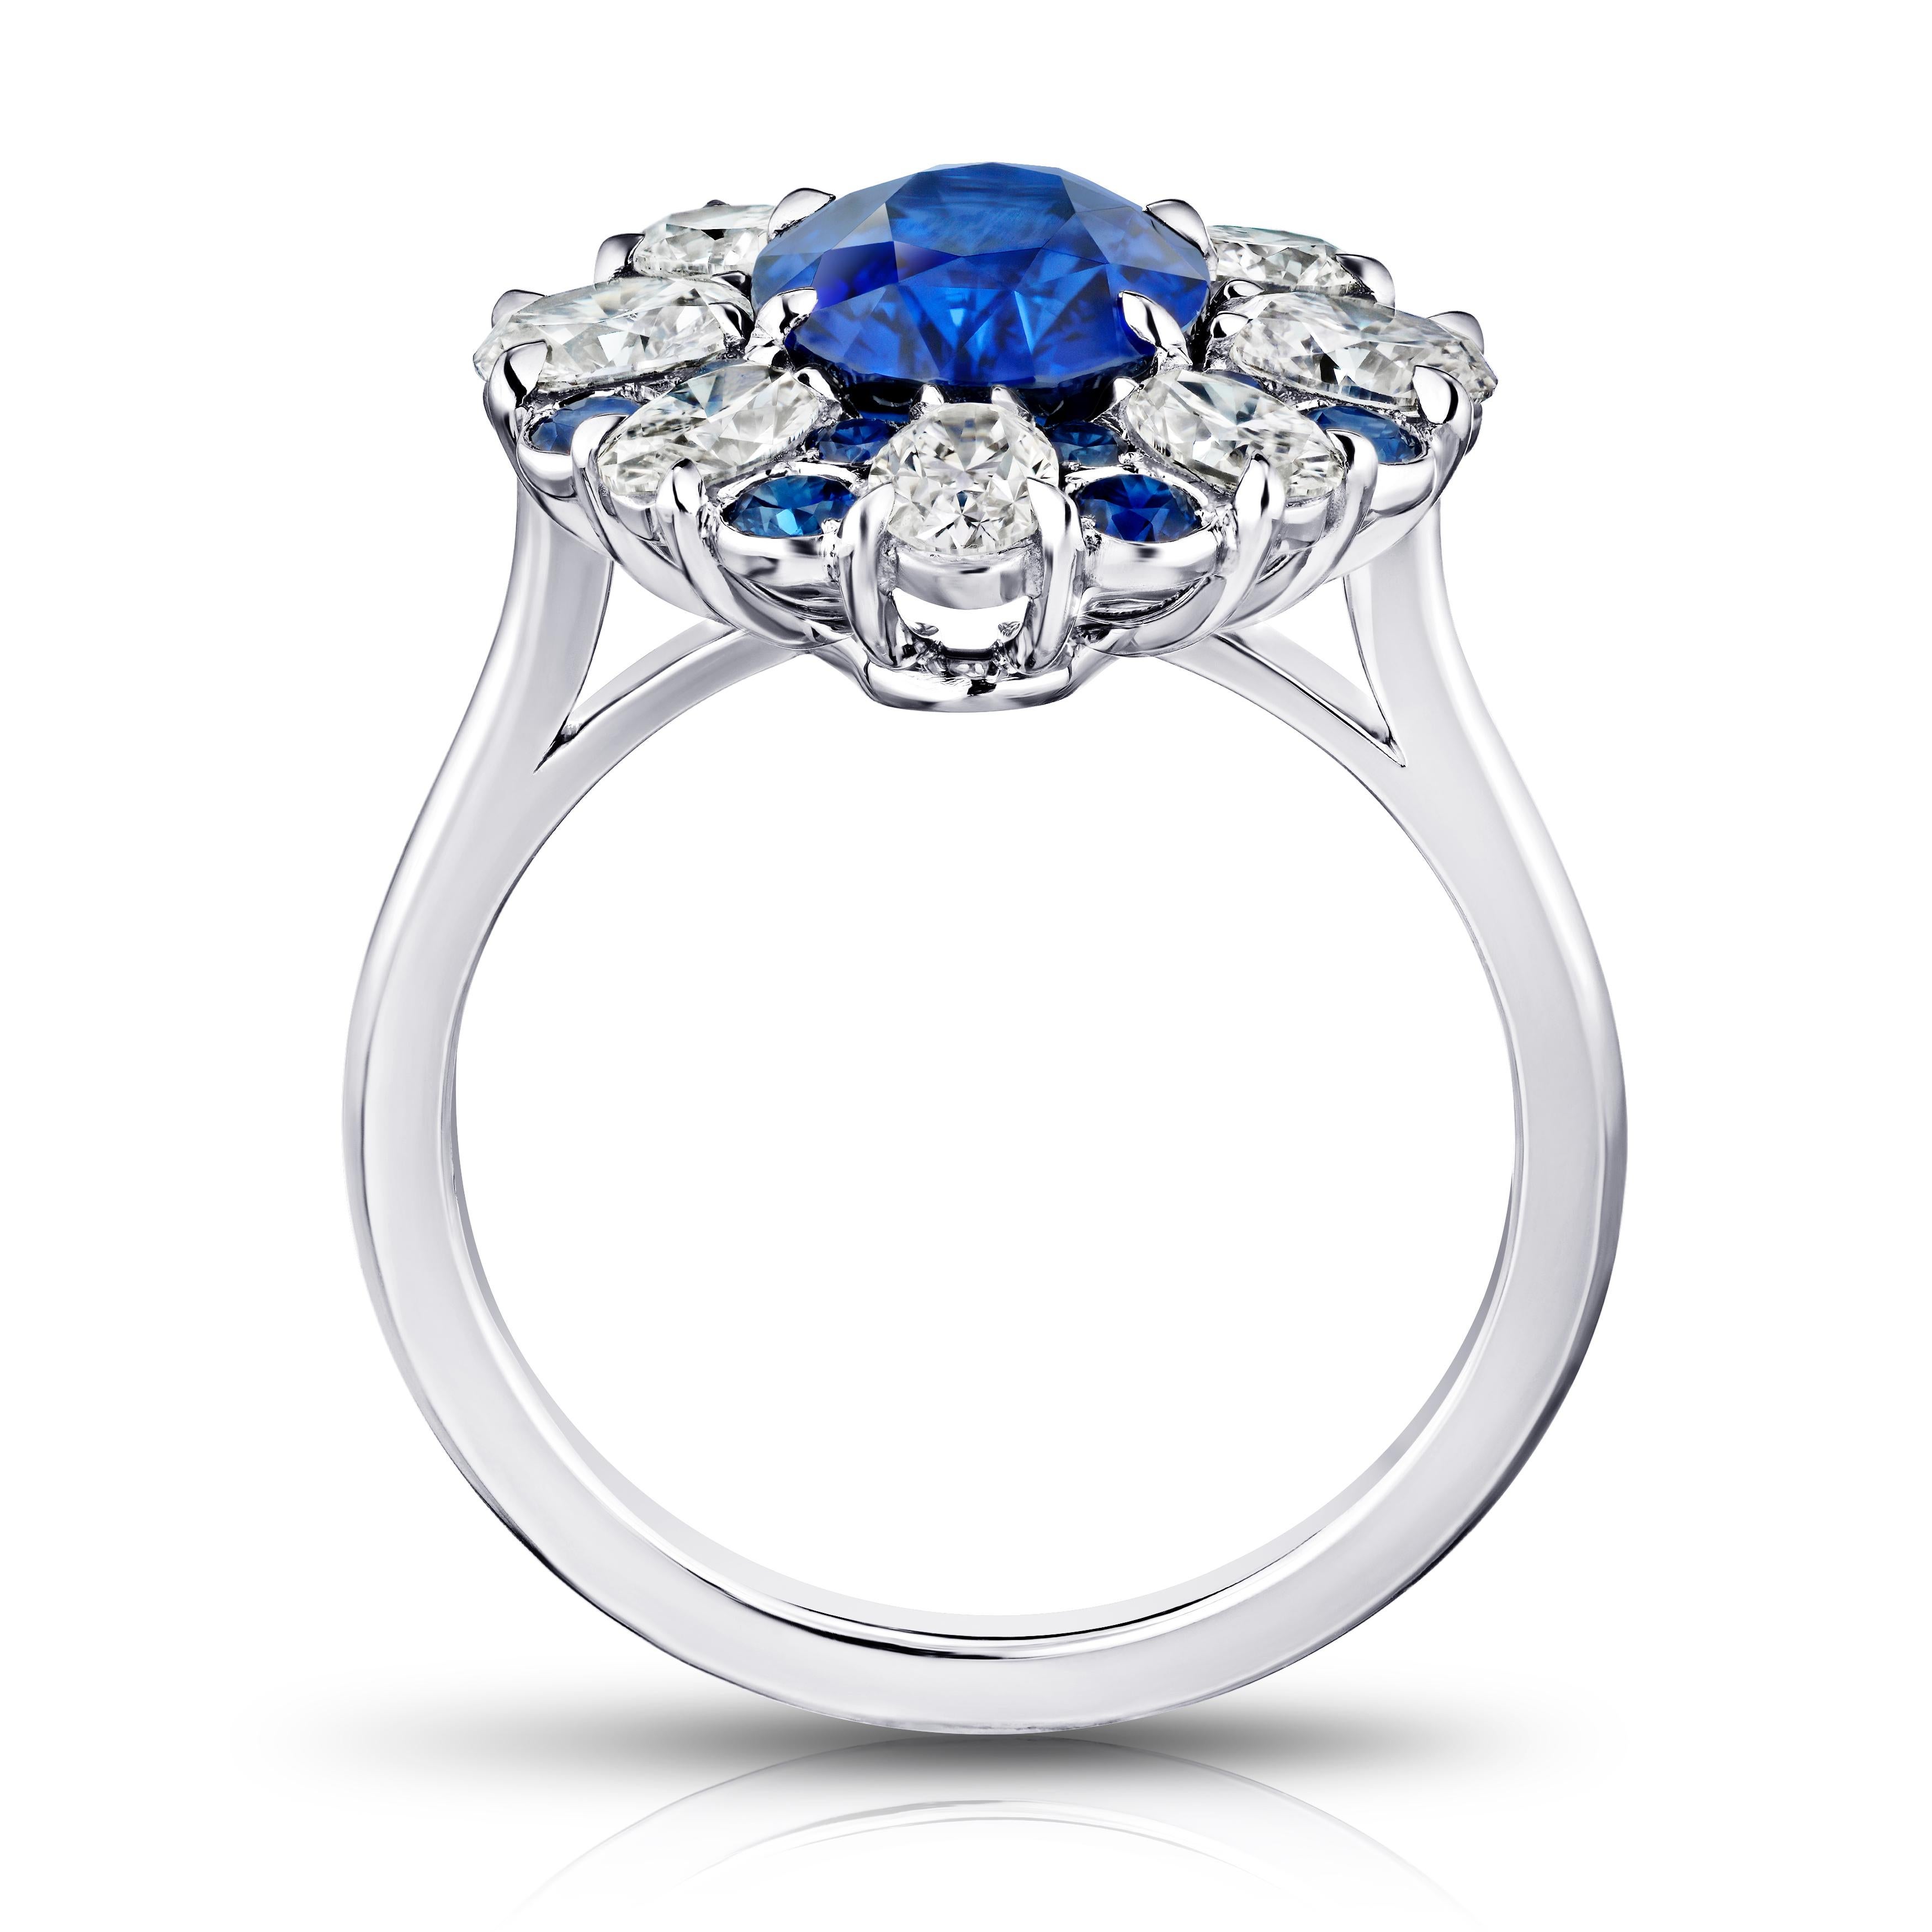 Contemporary 3.11 Carat Oval Blue Sapphire and Diamond Ring For Sale